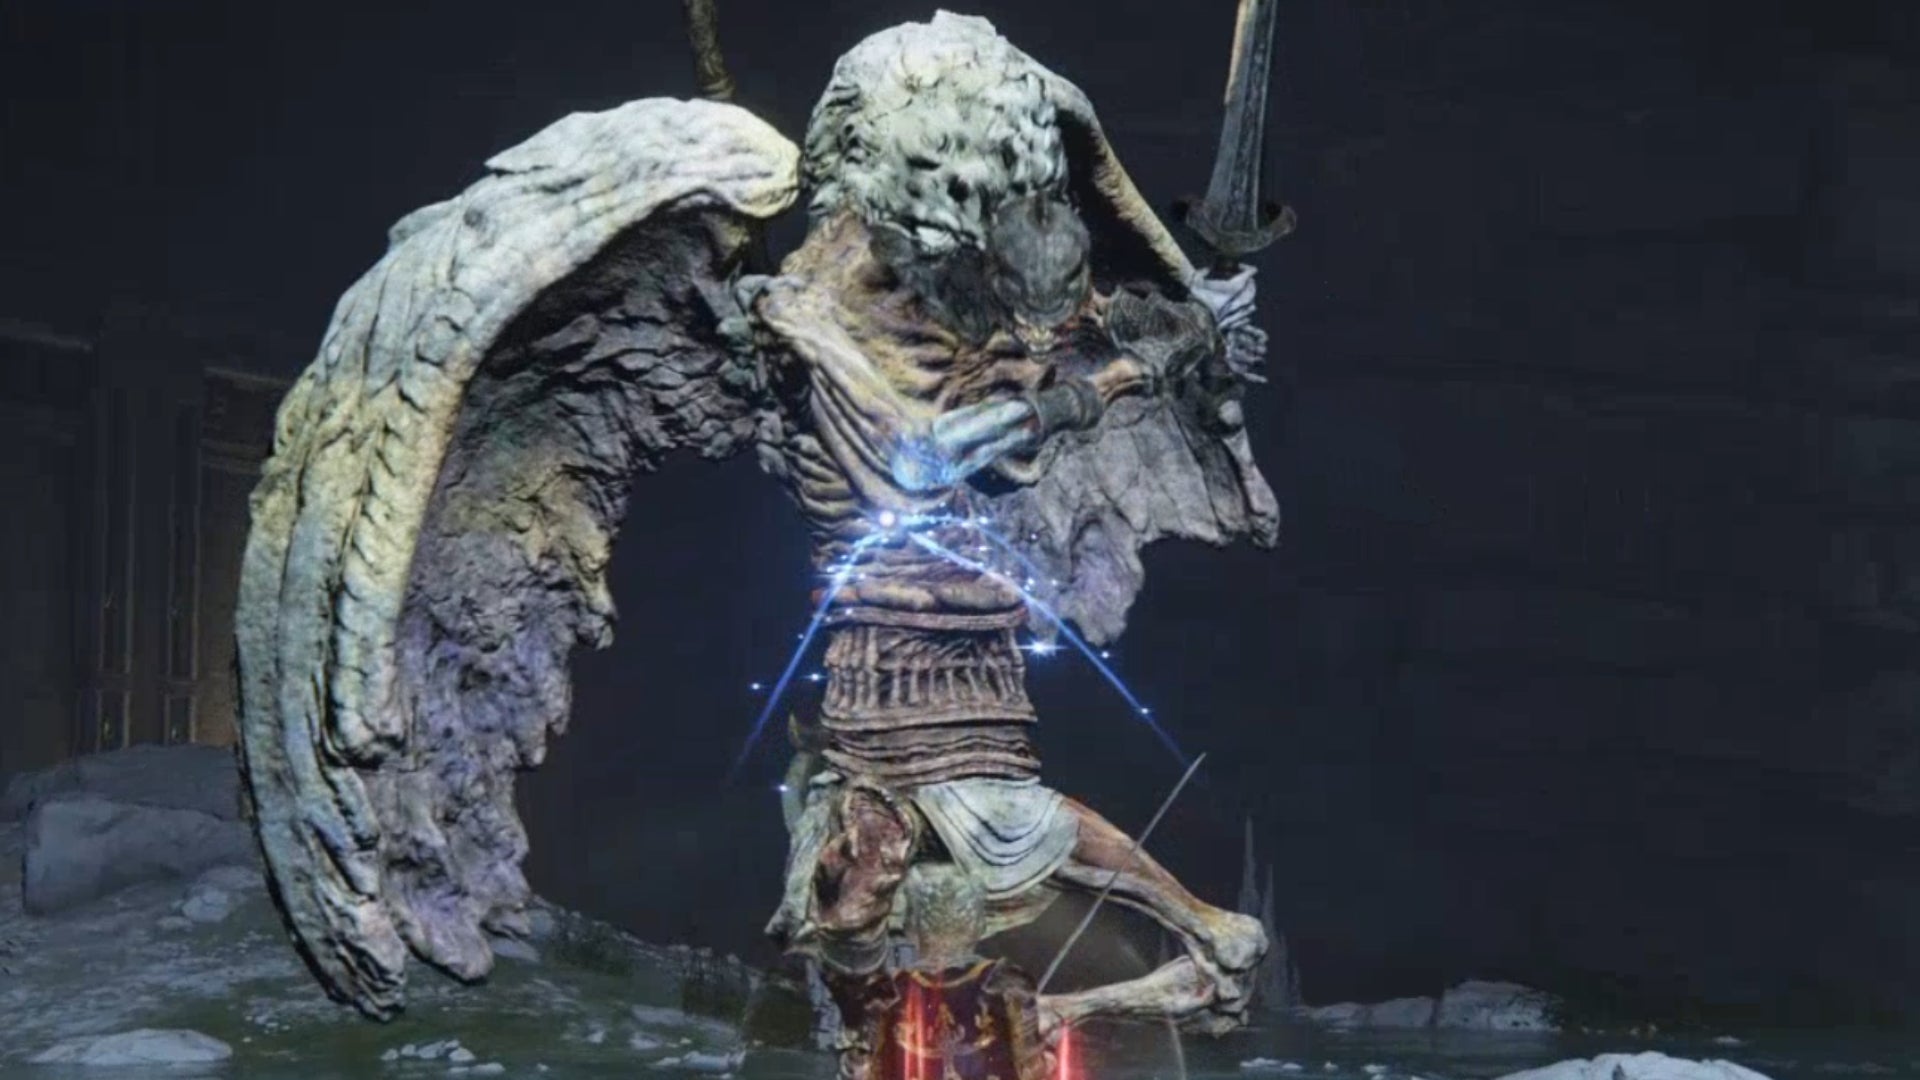 A Valiant Gargoyle boss in Elden Ring raises its sword to strike at the player below.